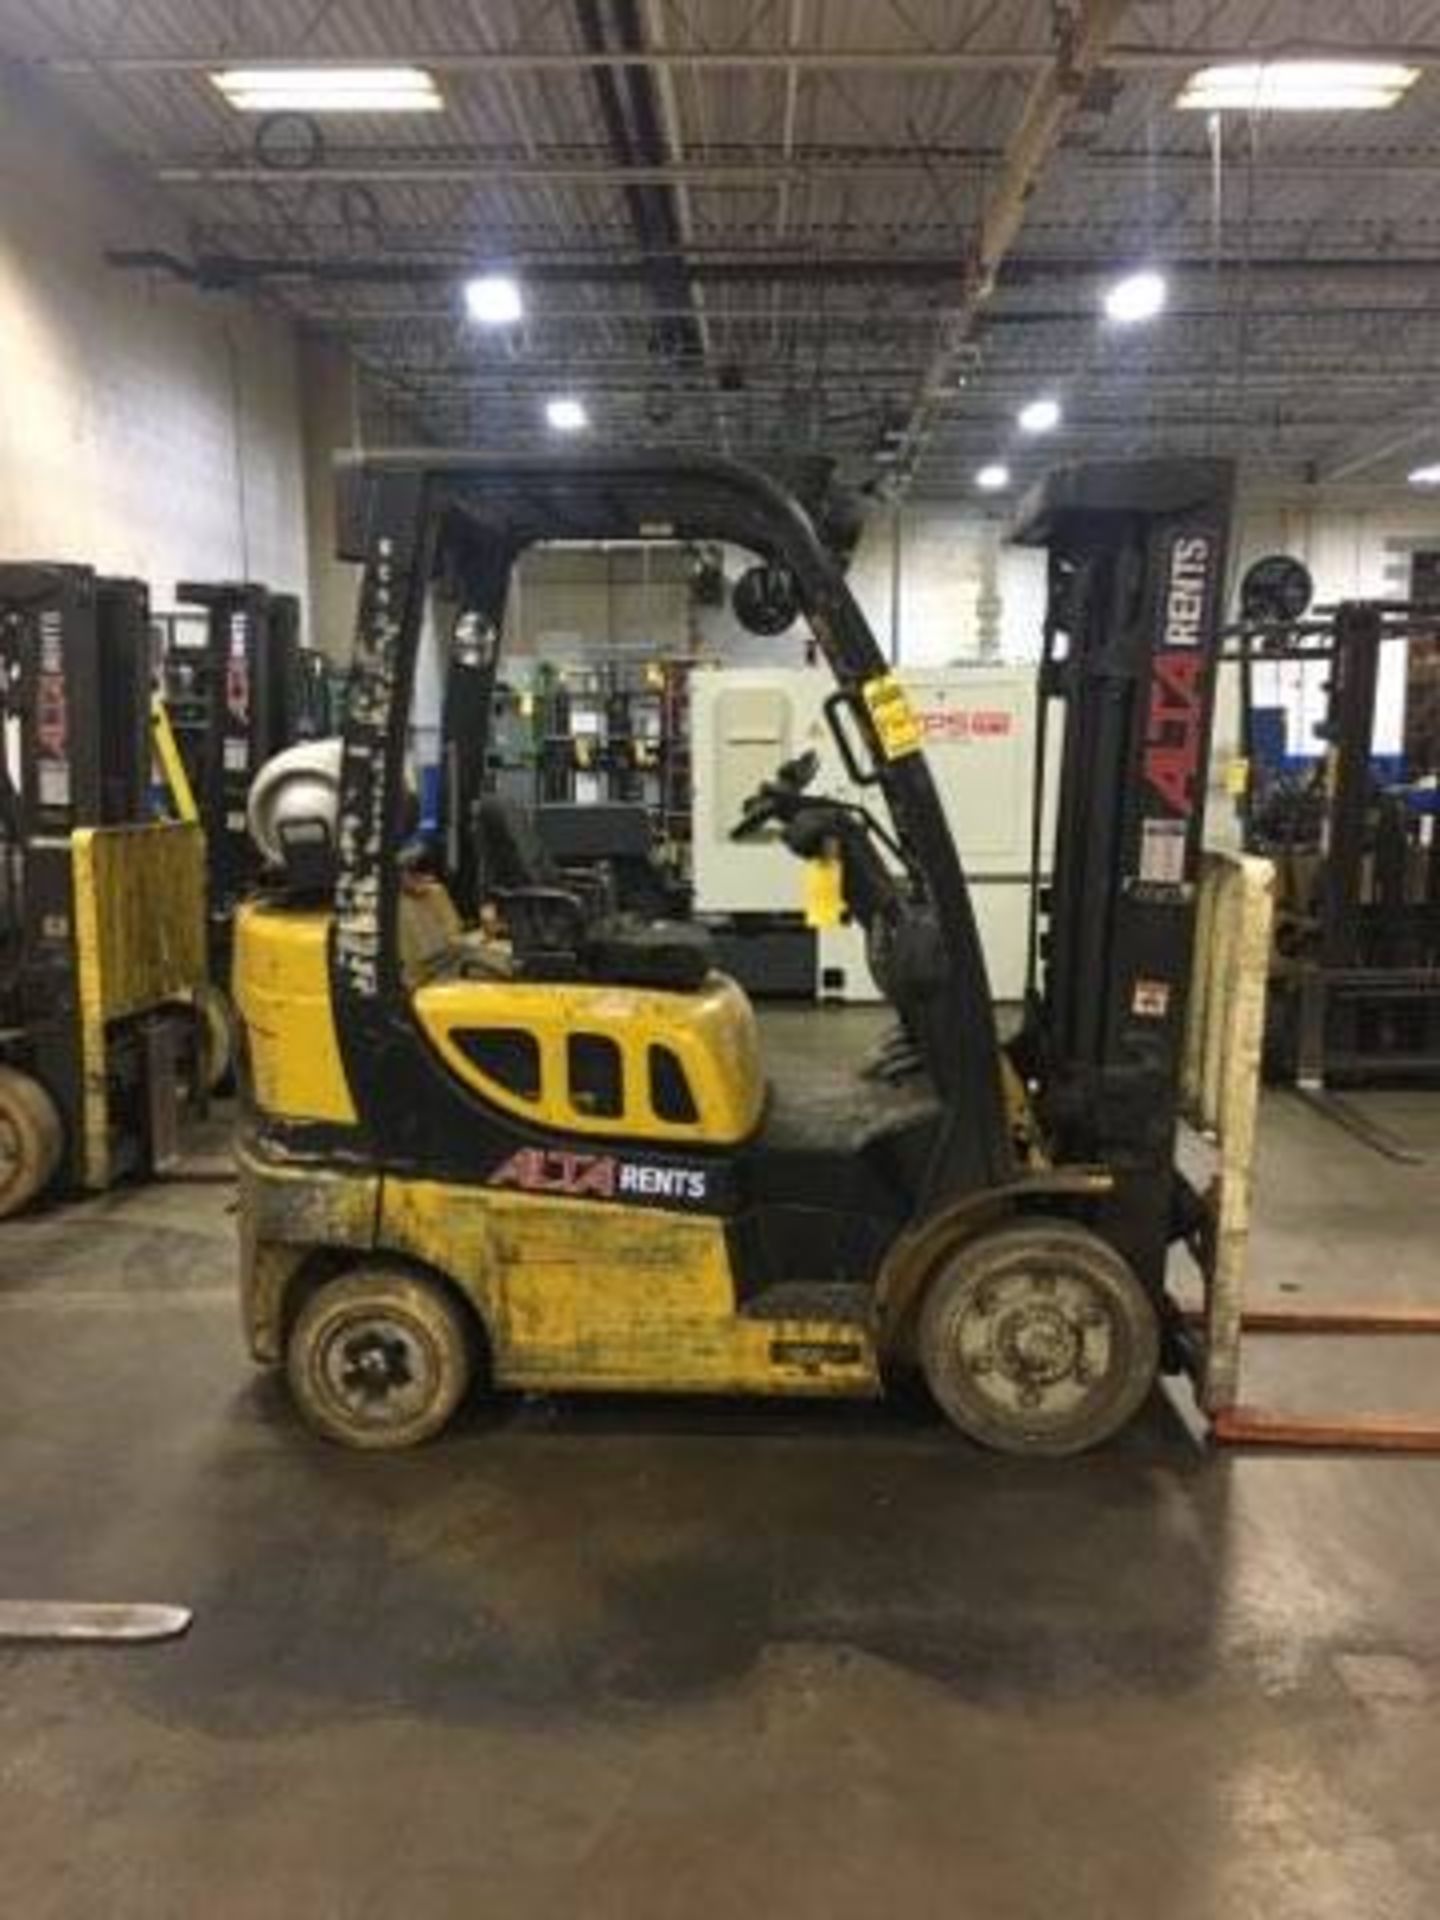 2014 YALE 5,000-LB. CAPACITY LPG FORKLIFT, MODEL GLC050VX, 3-STAGE MAST, 194.9'' MAX LOAD HEIGHT,